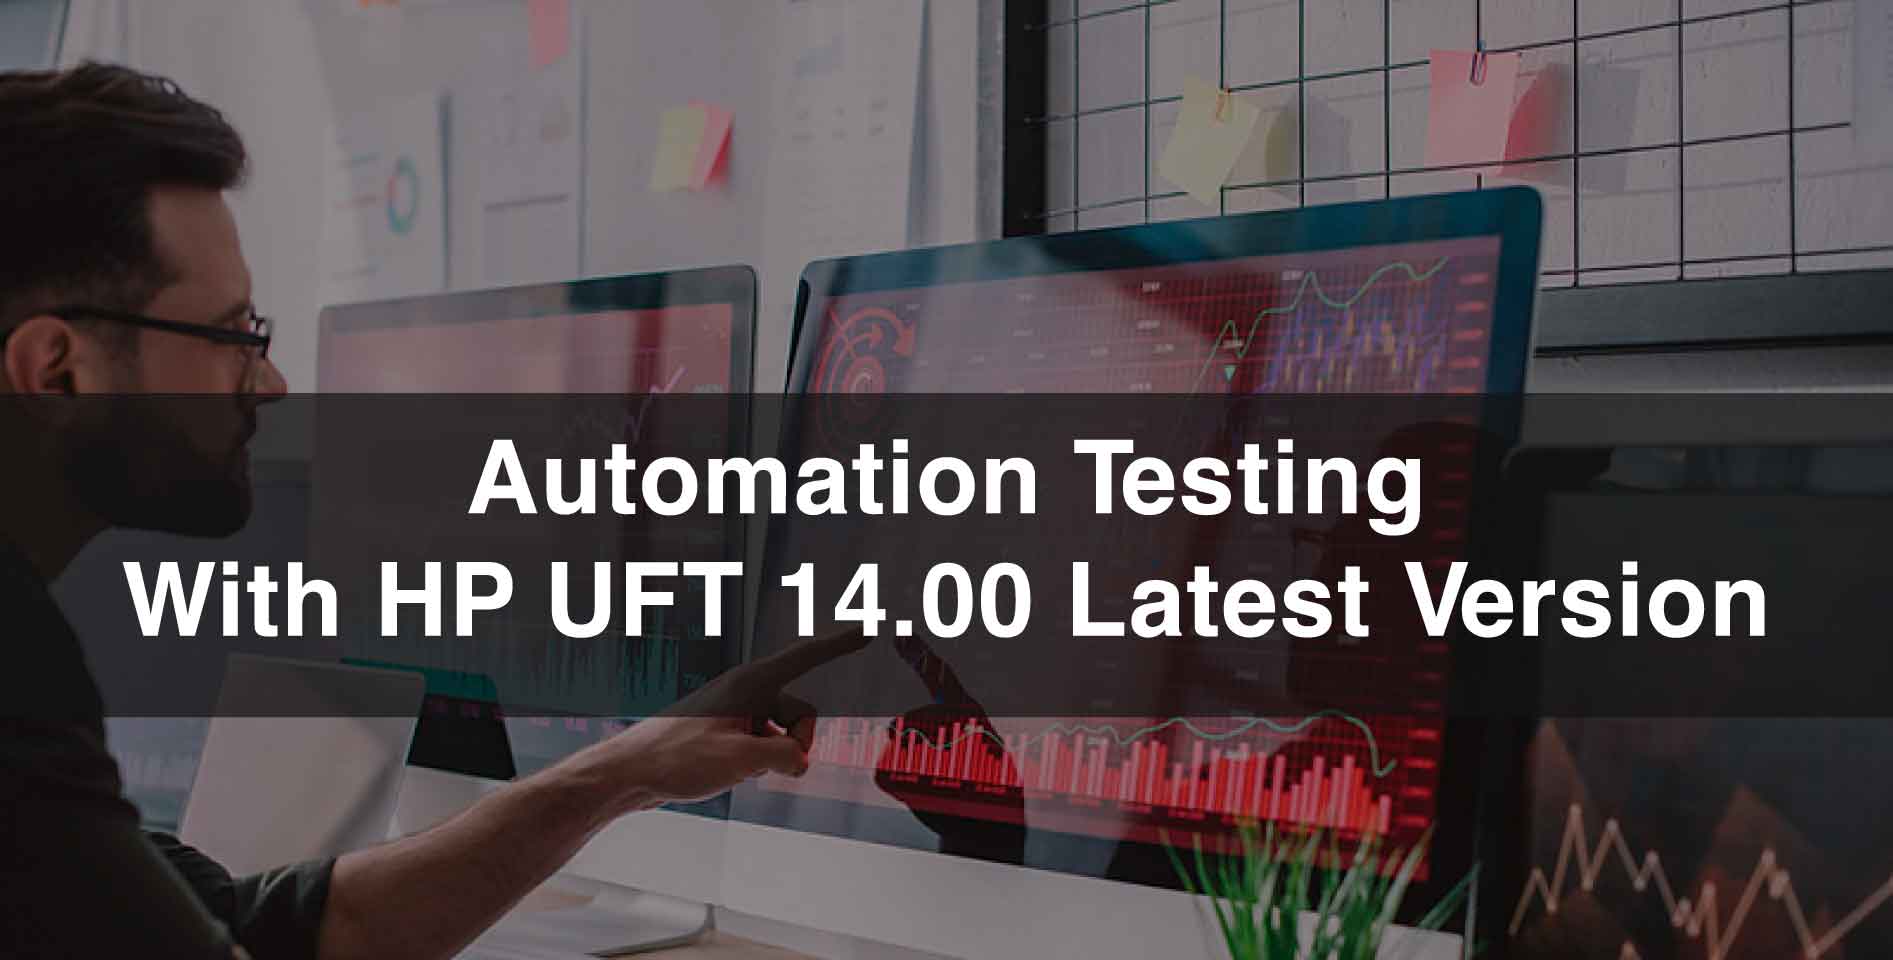 Udemy — Automation Testing With HP UFT 14.00 Latest Version